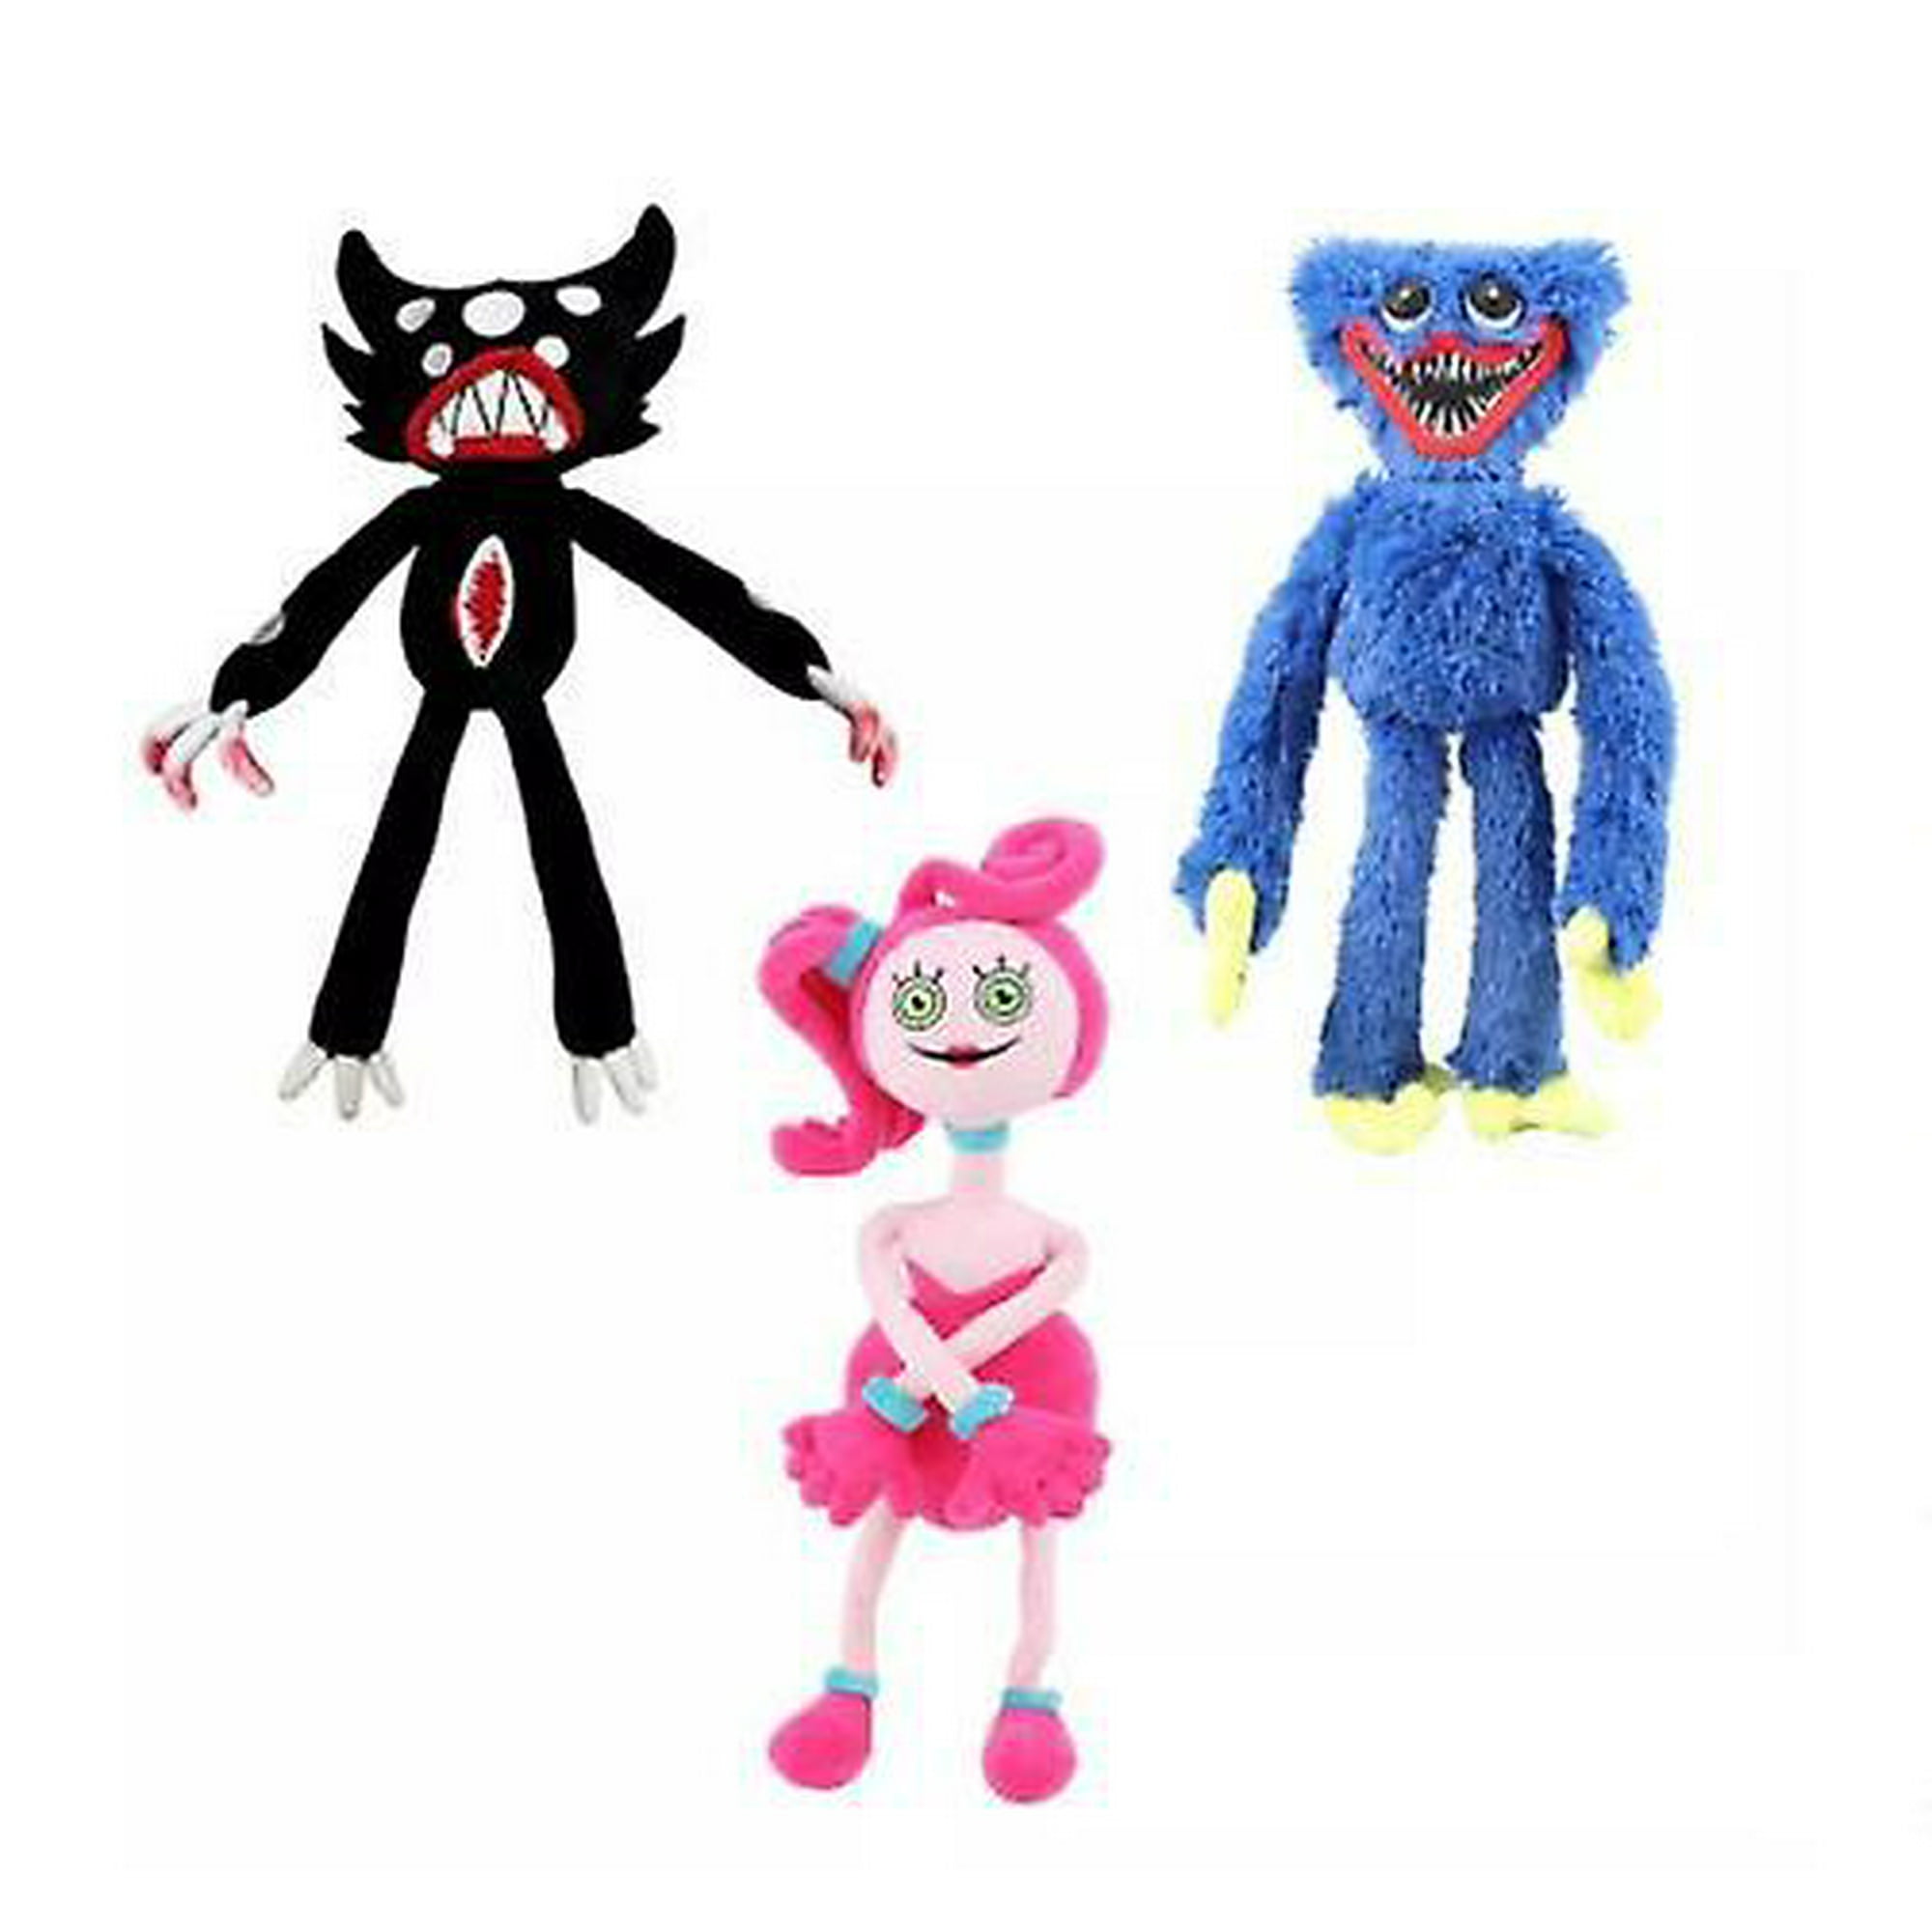 Killy Willy/ Huggy Wuggy/ Kissy Missy Game Character Plush Toy ...